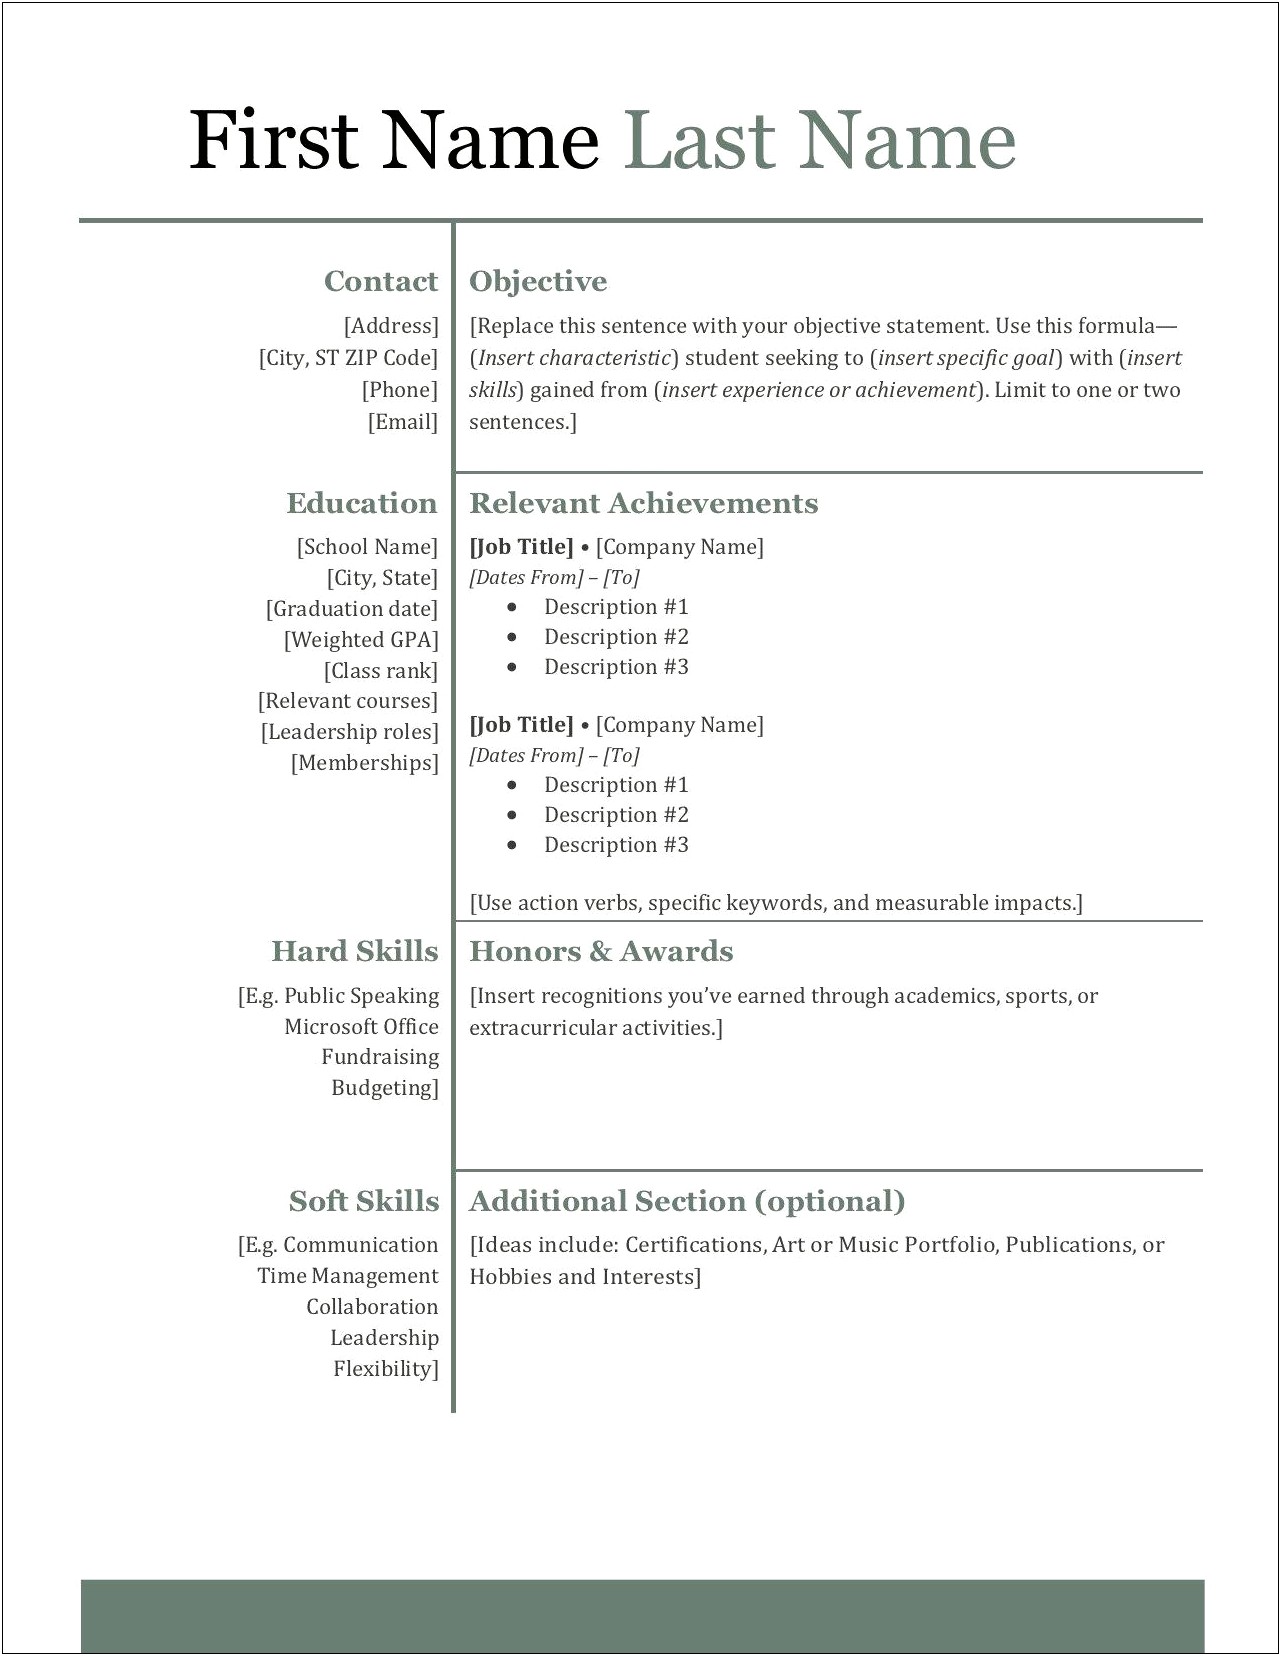 Personal Summary Resume Out Of Undergrad